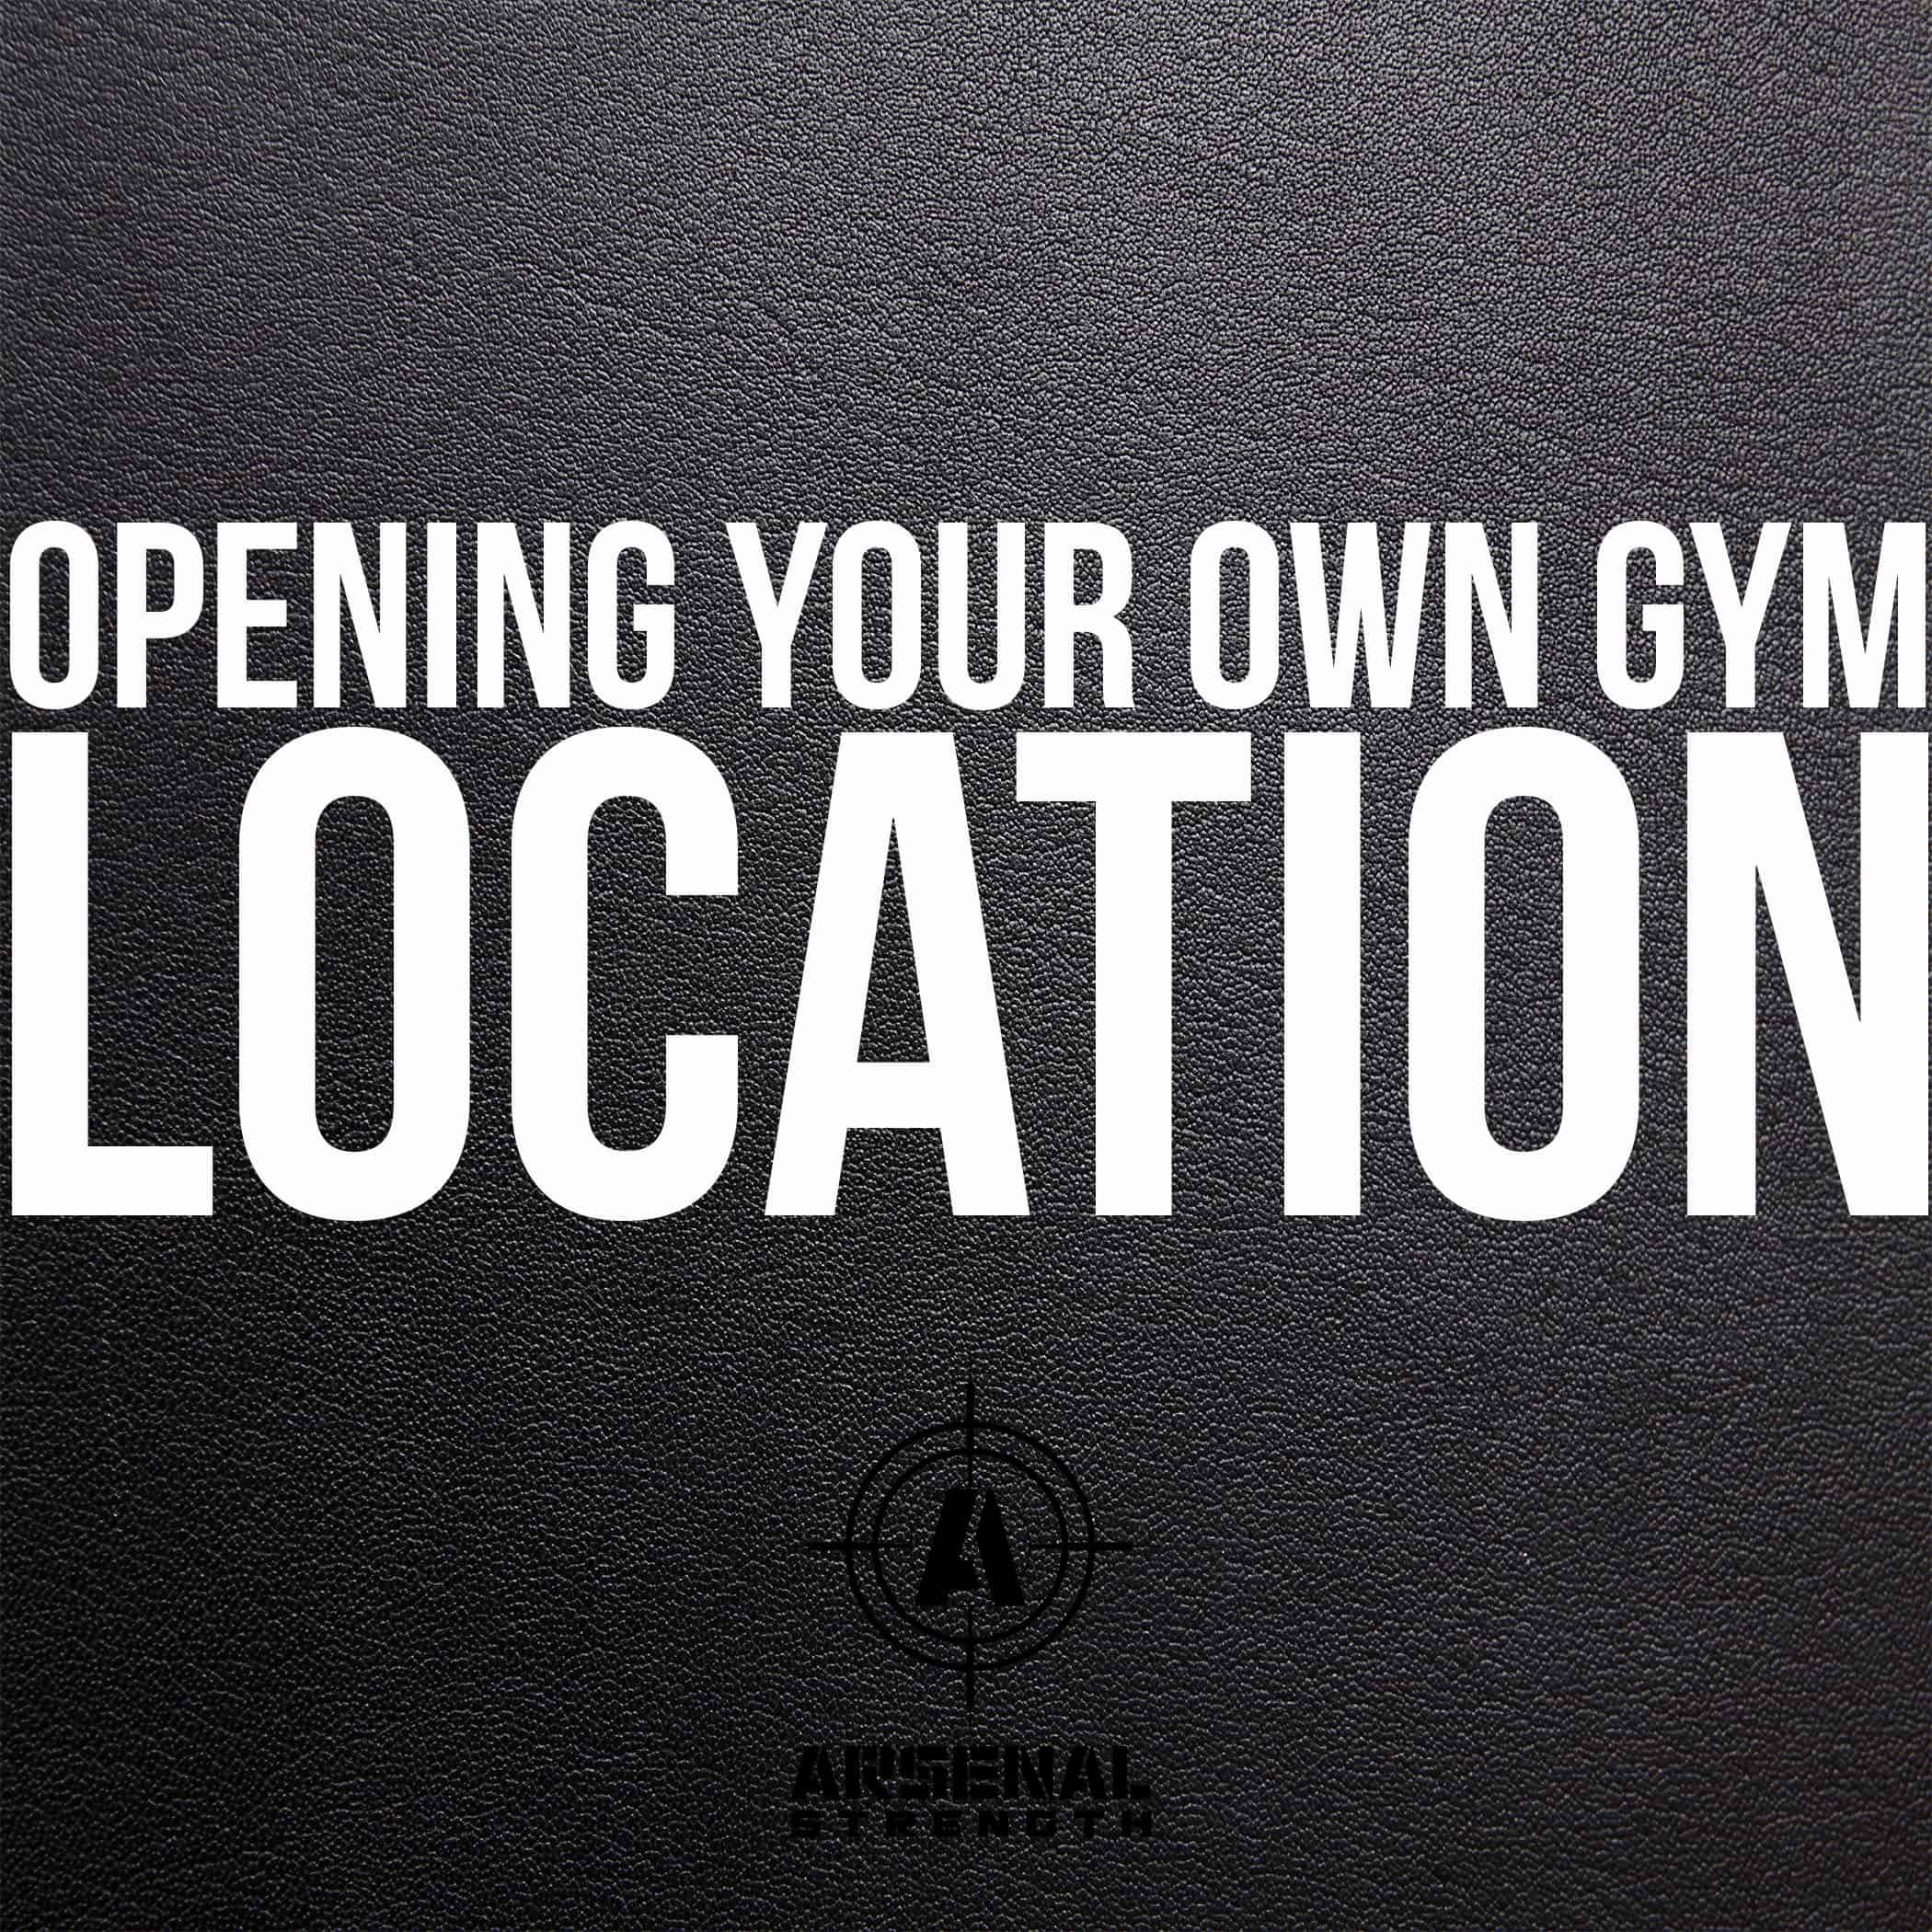 Opening Your Own Gym: Location